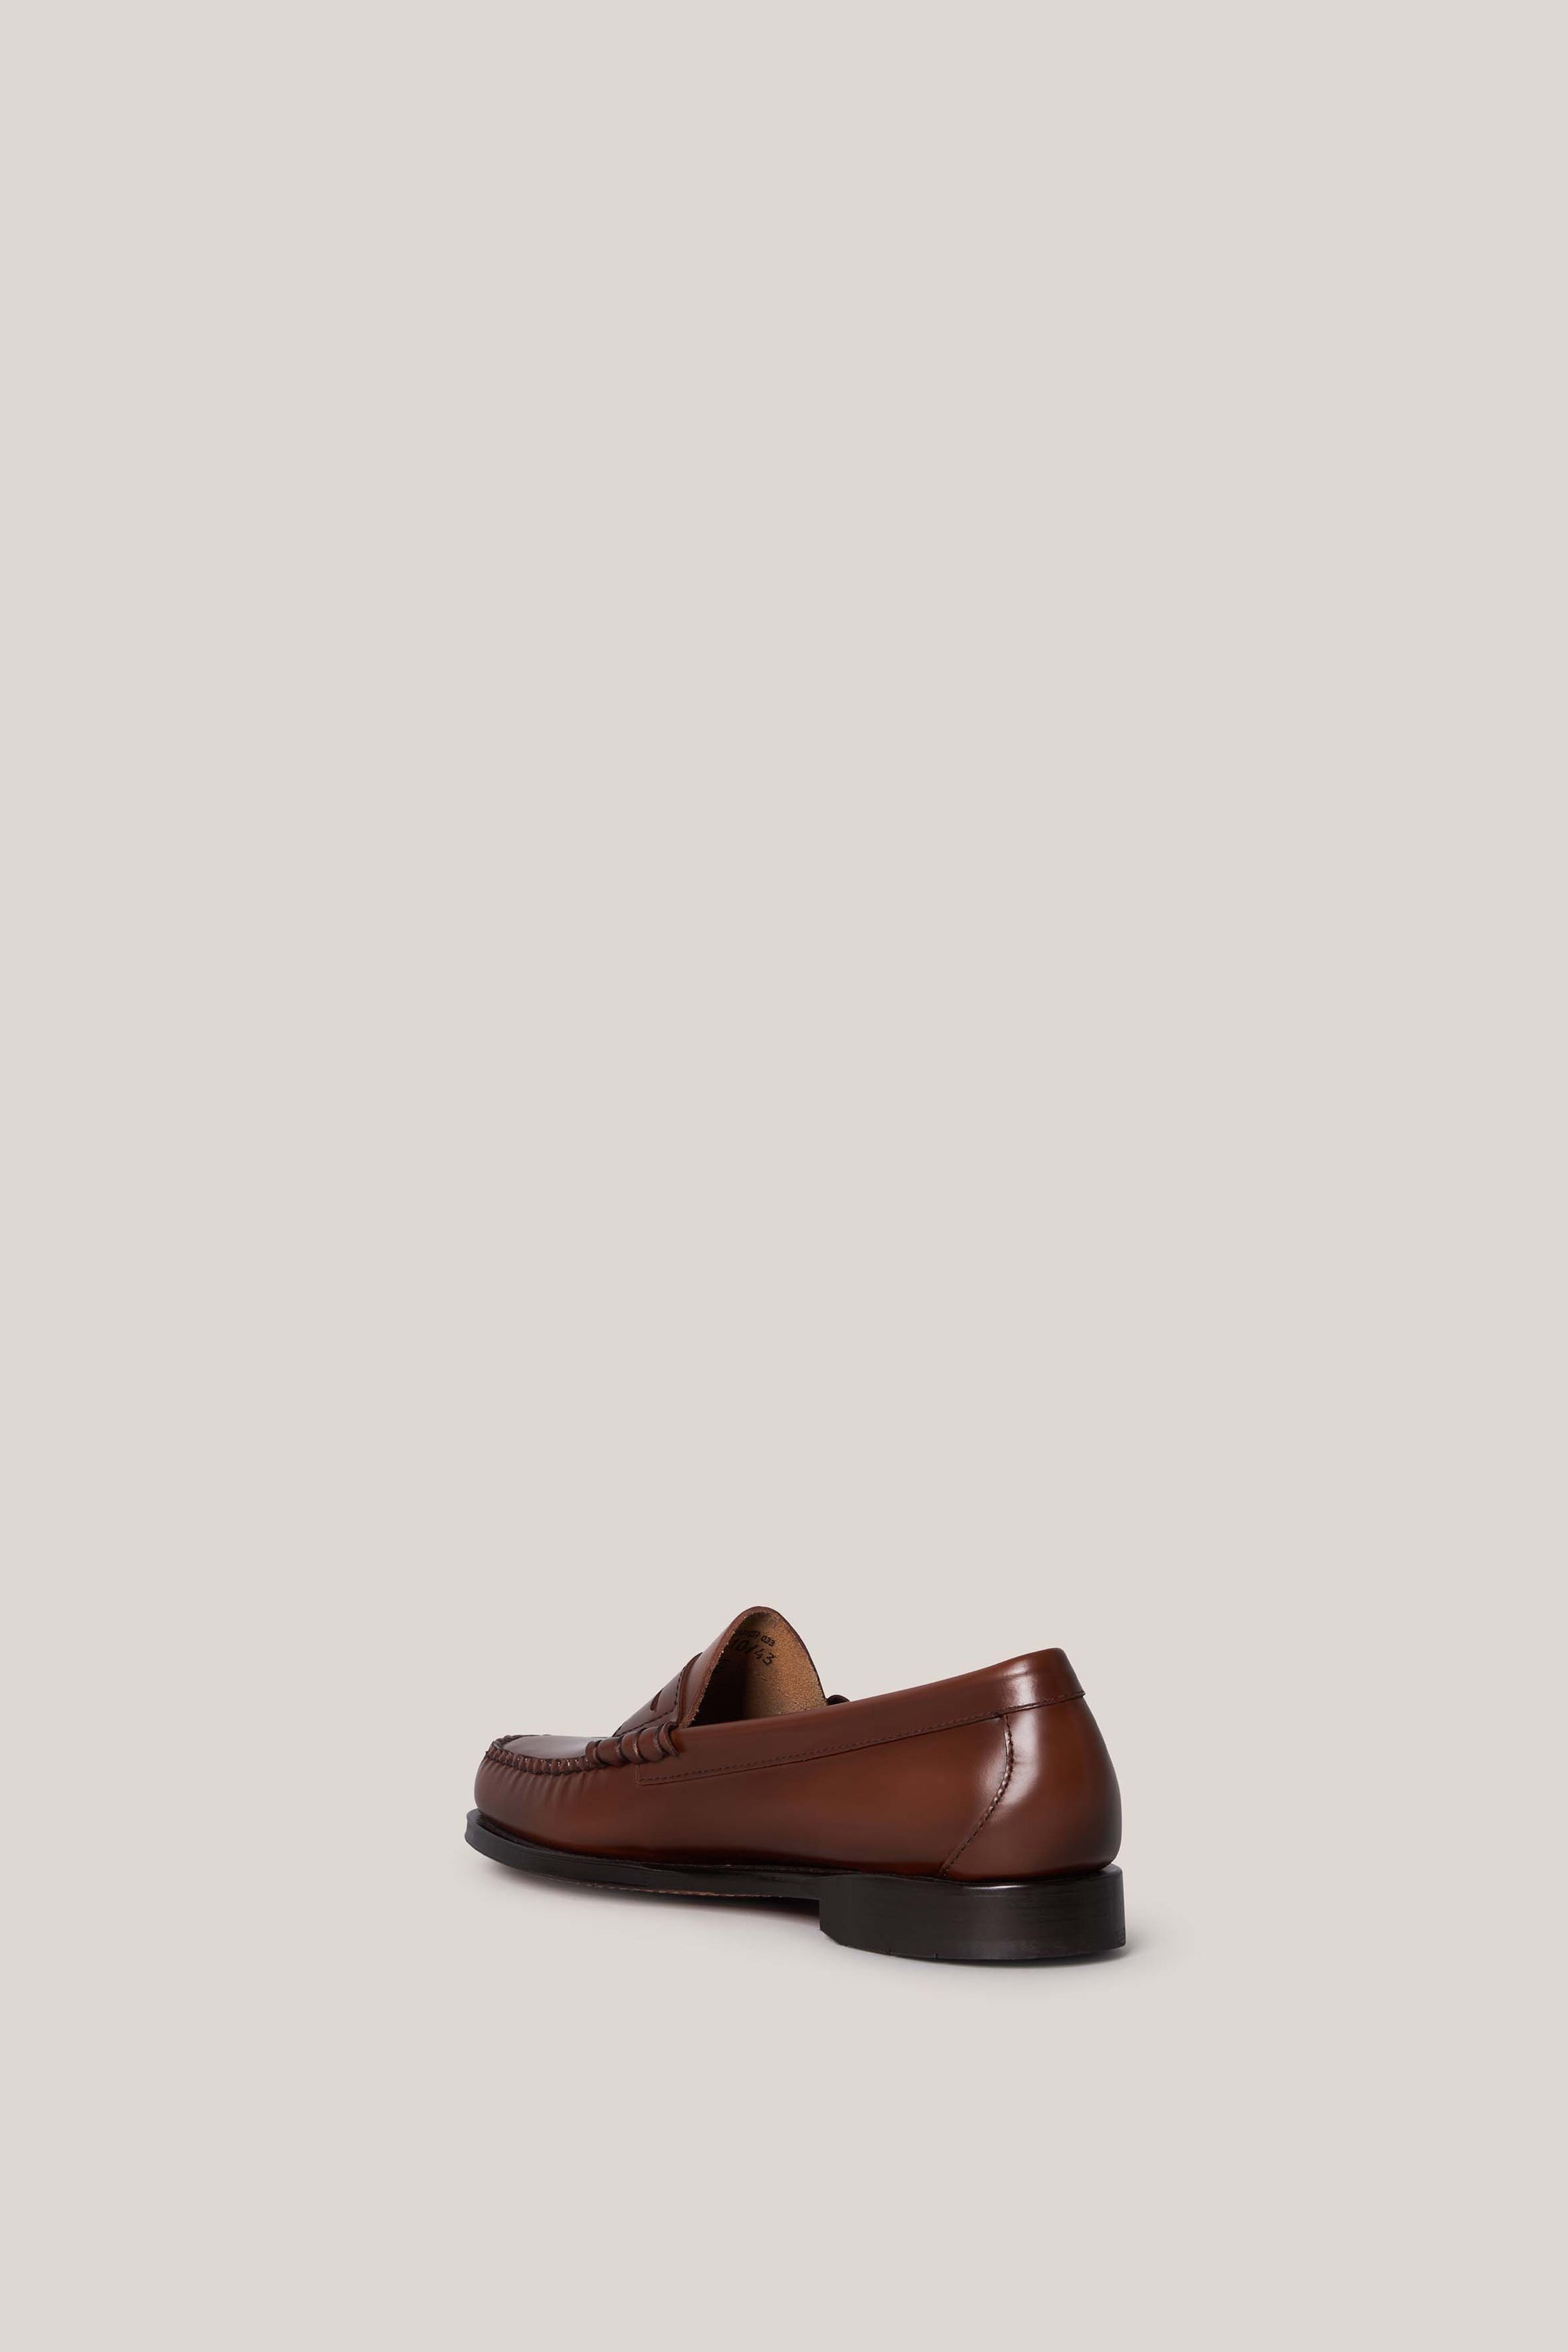 Brown Polished Leather Penny Loafers